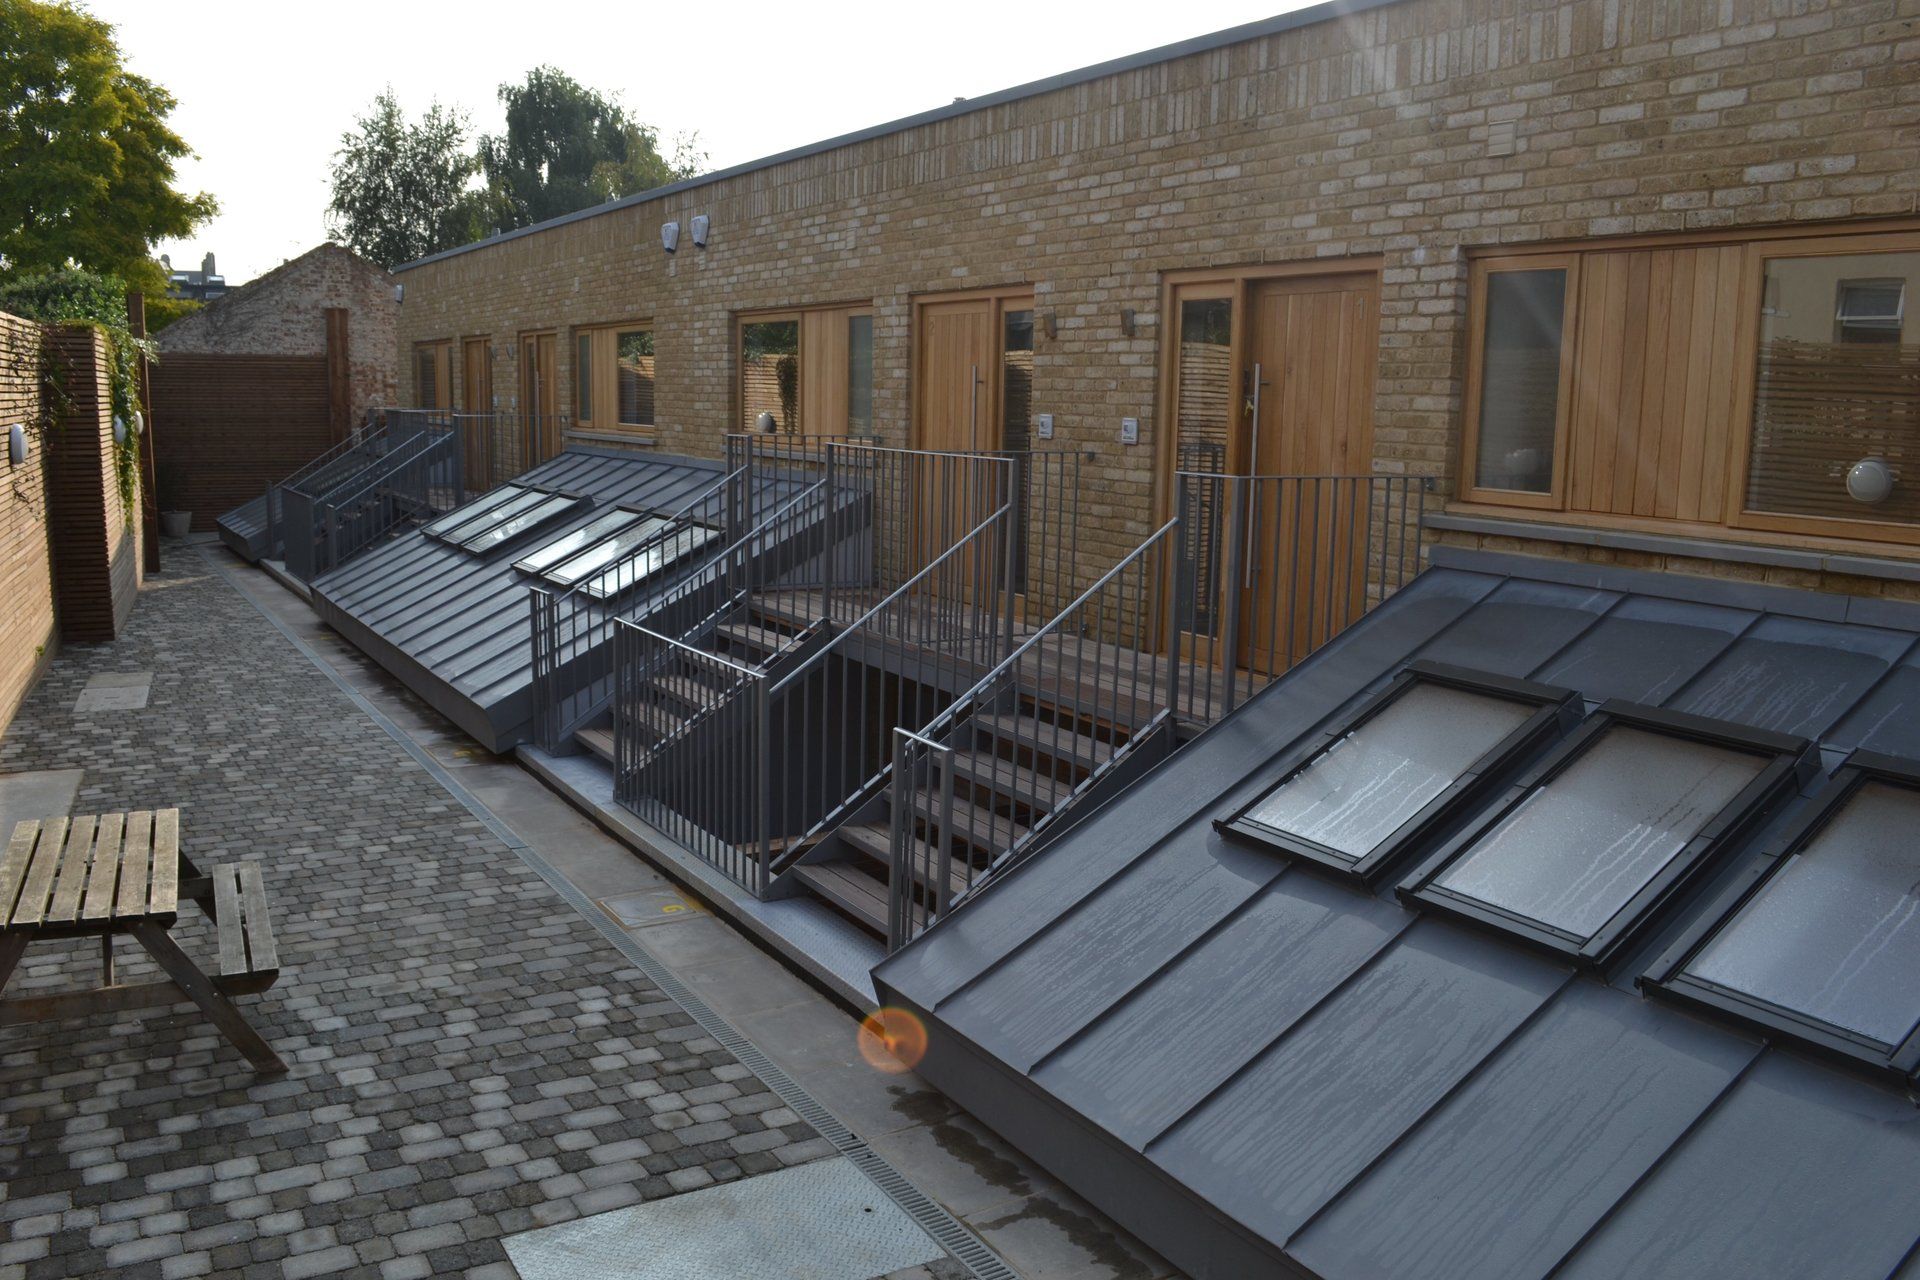 Brickyard Mews at near completion by David Ubaka Placemakers for  Clients Neo Neophytou & Stuart  Brady